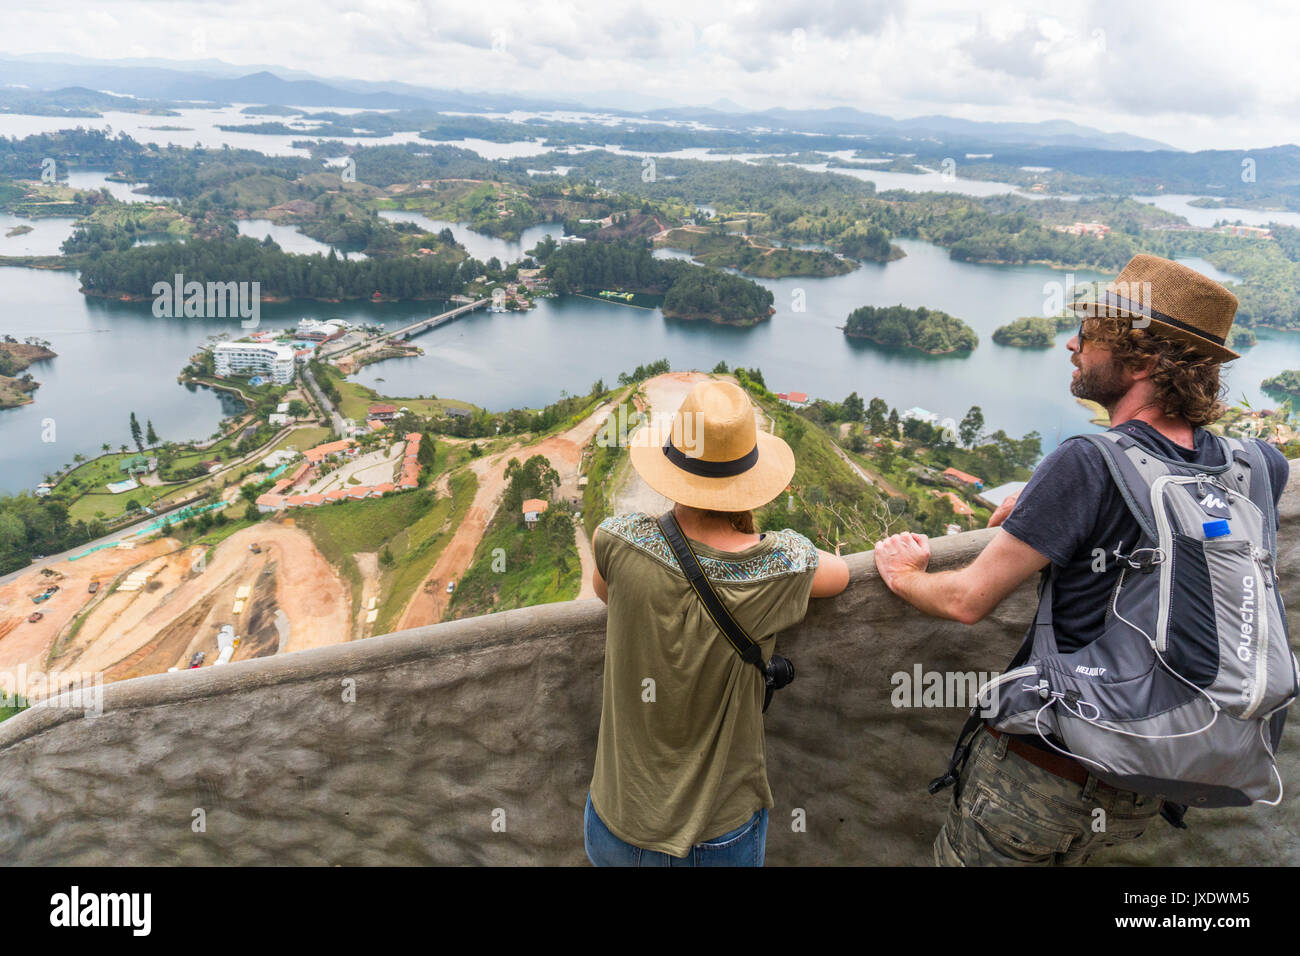 People looking at the view of Guatape Stock Photo